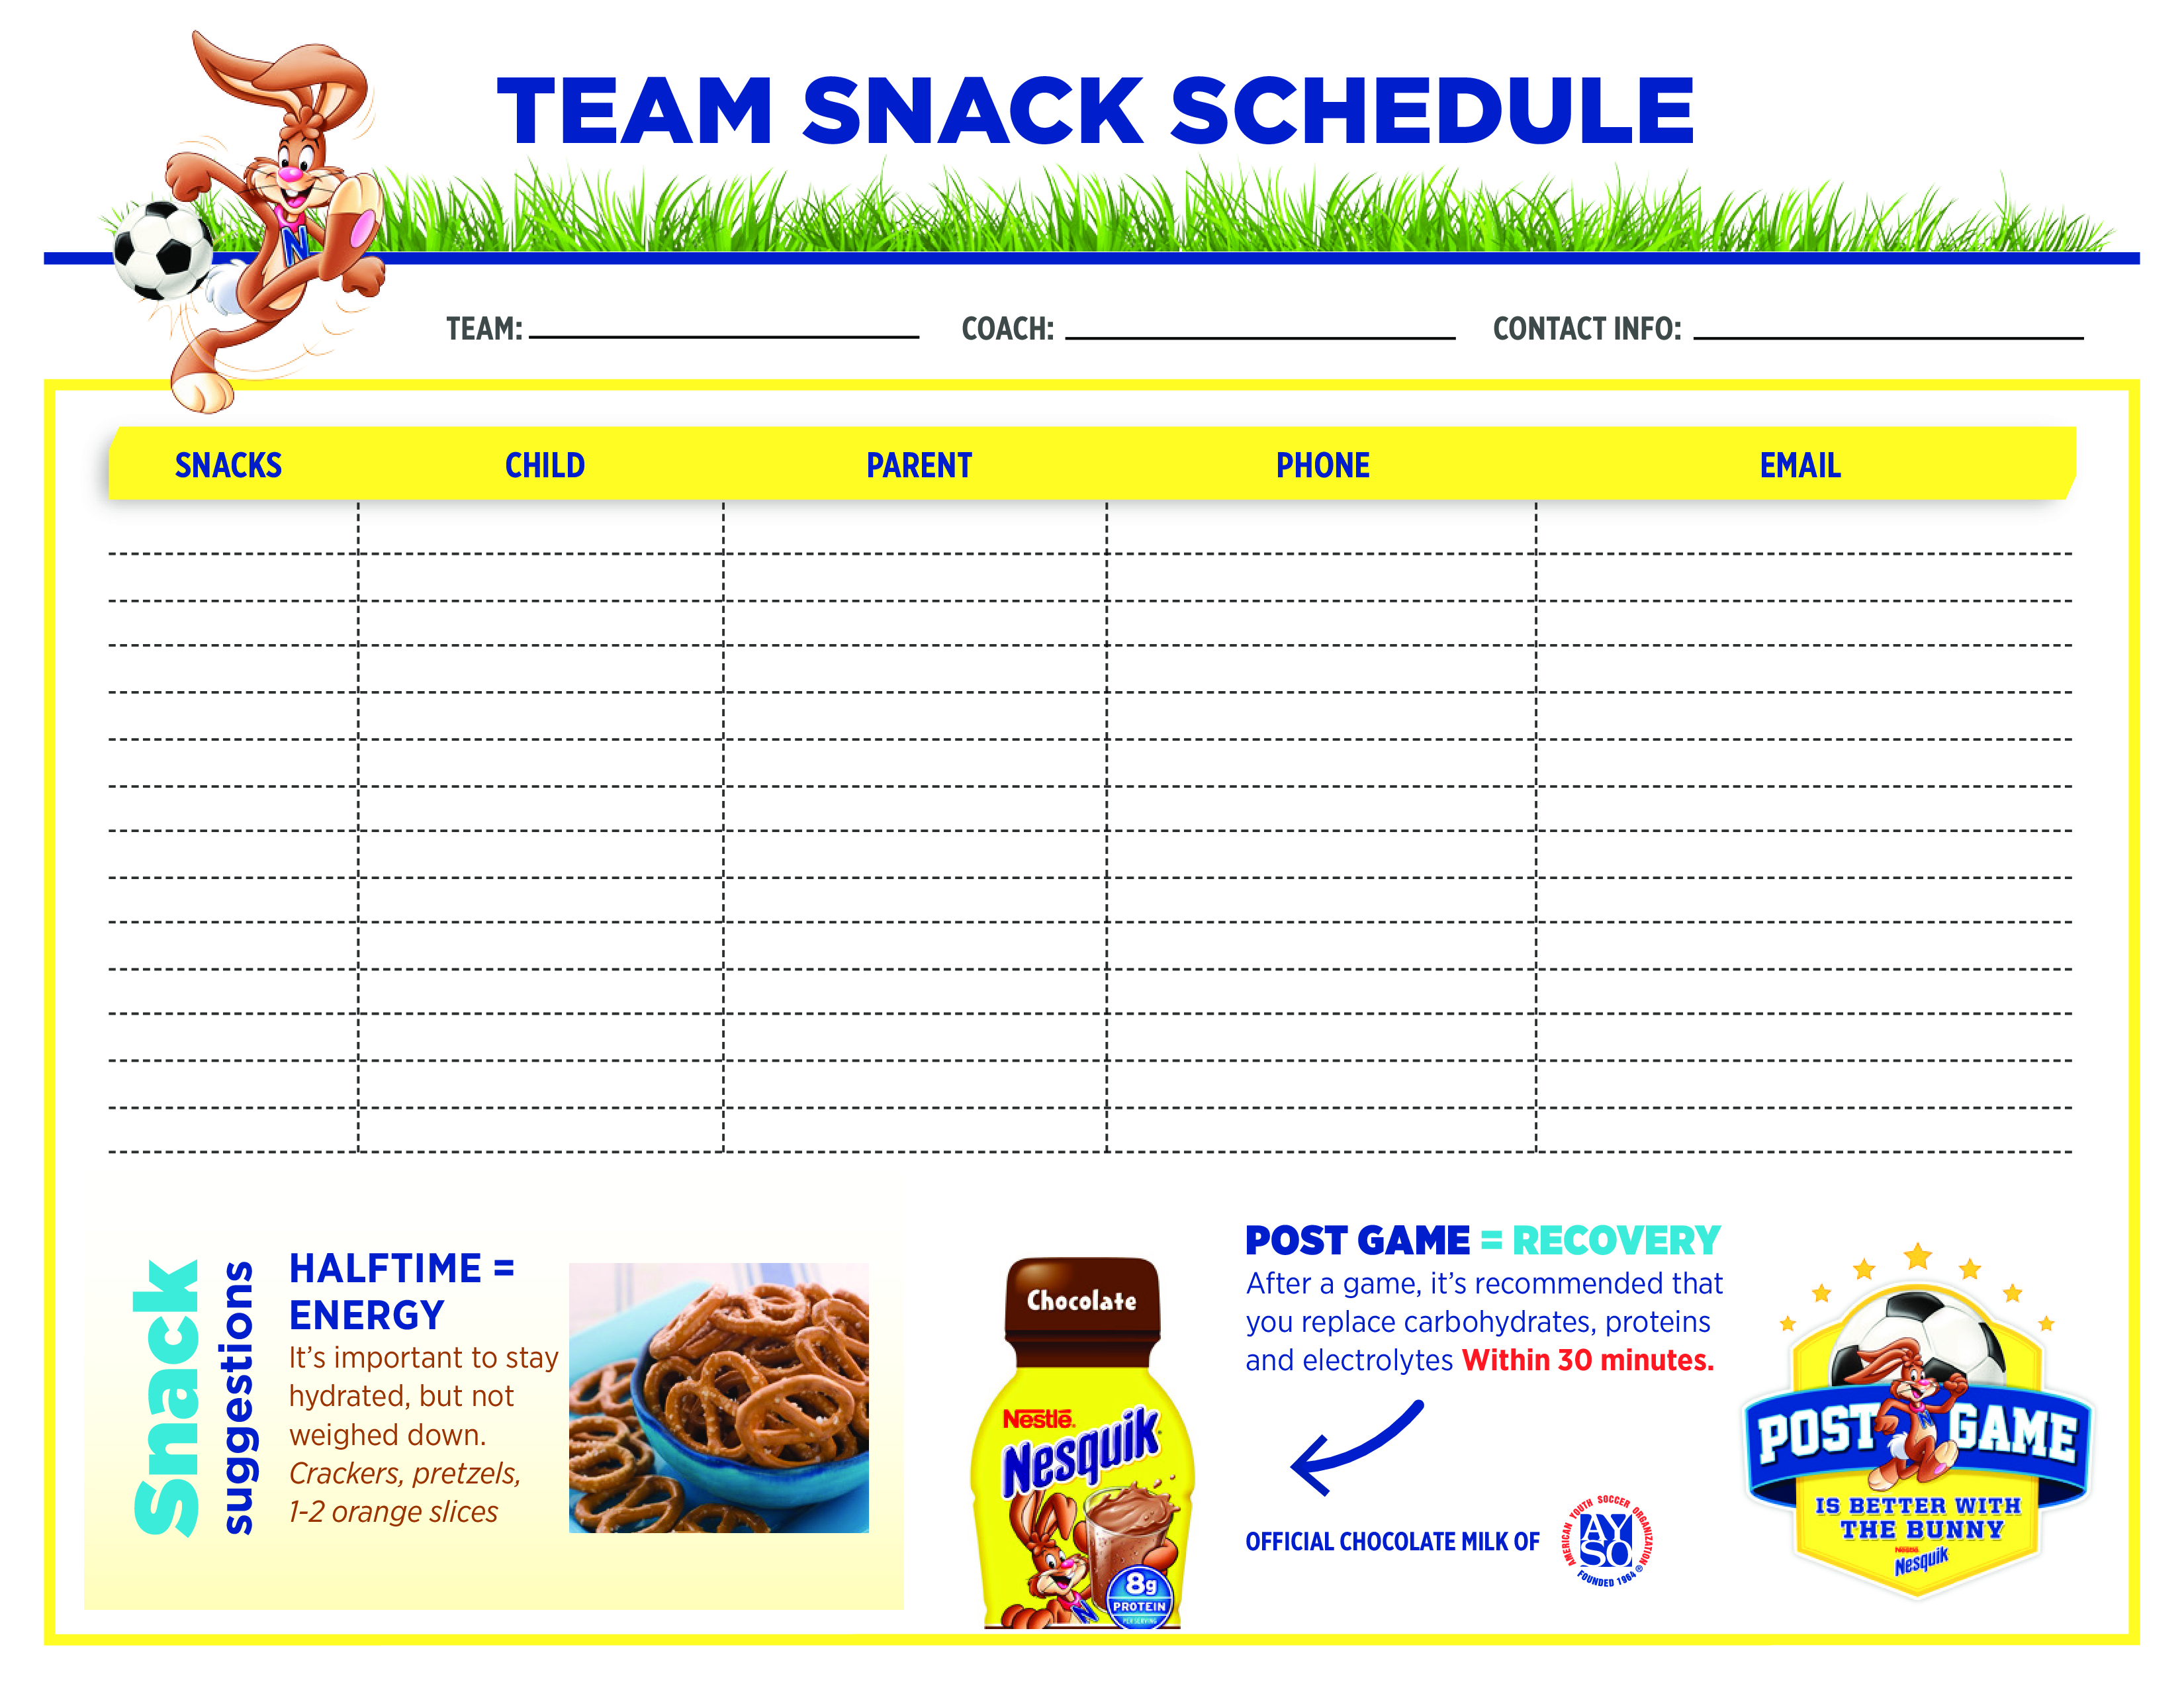 Team Snack Schedule Templates at